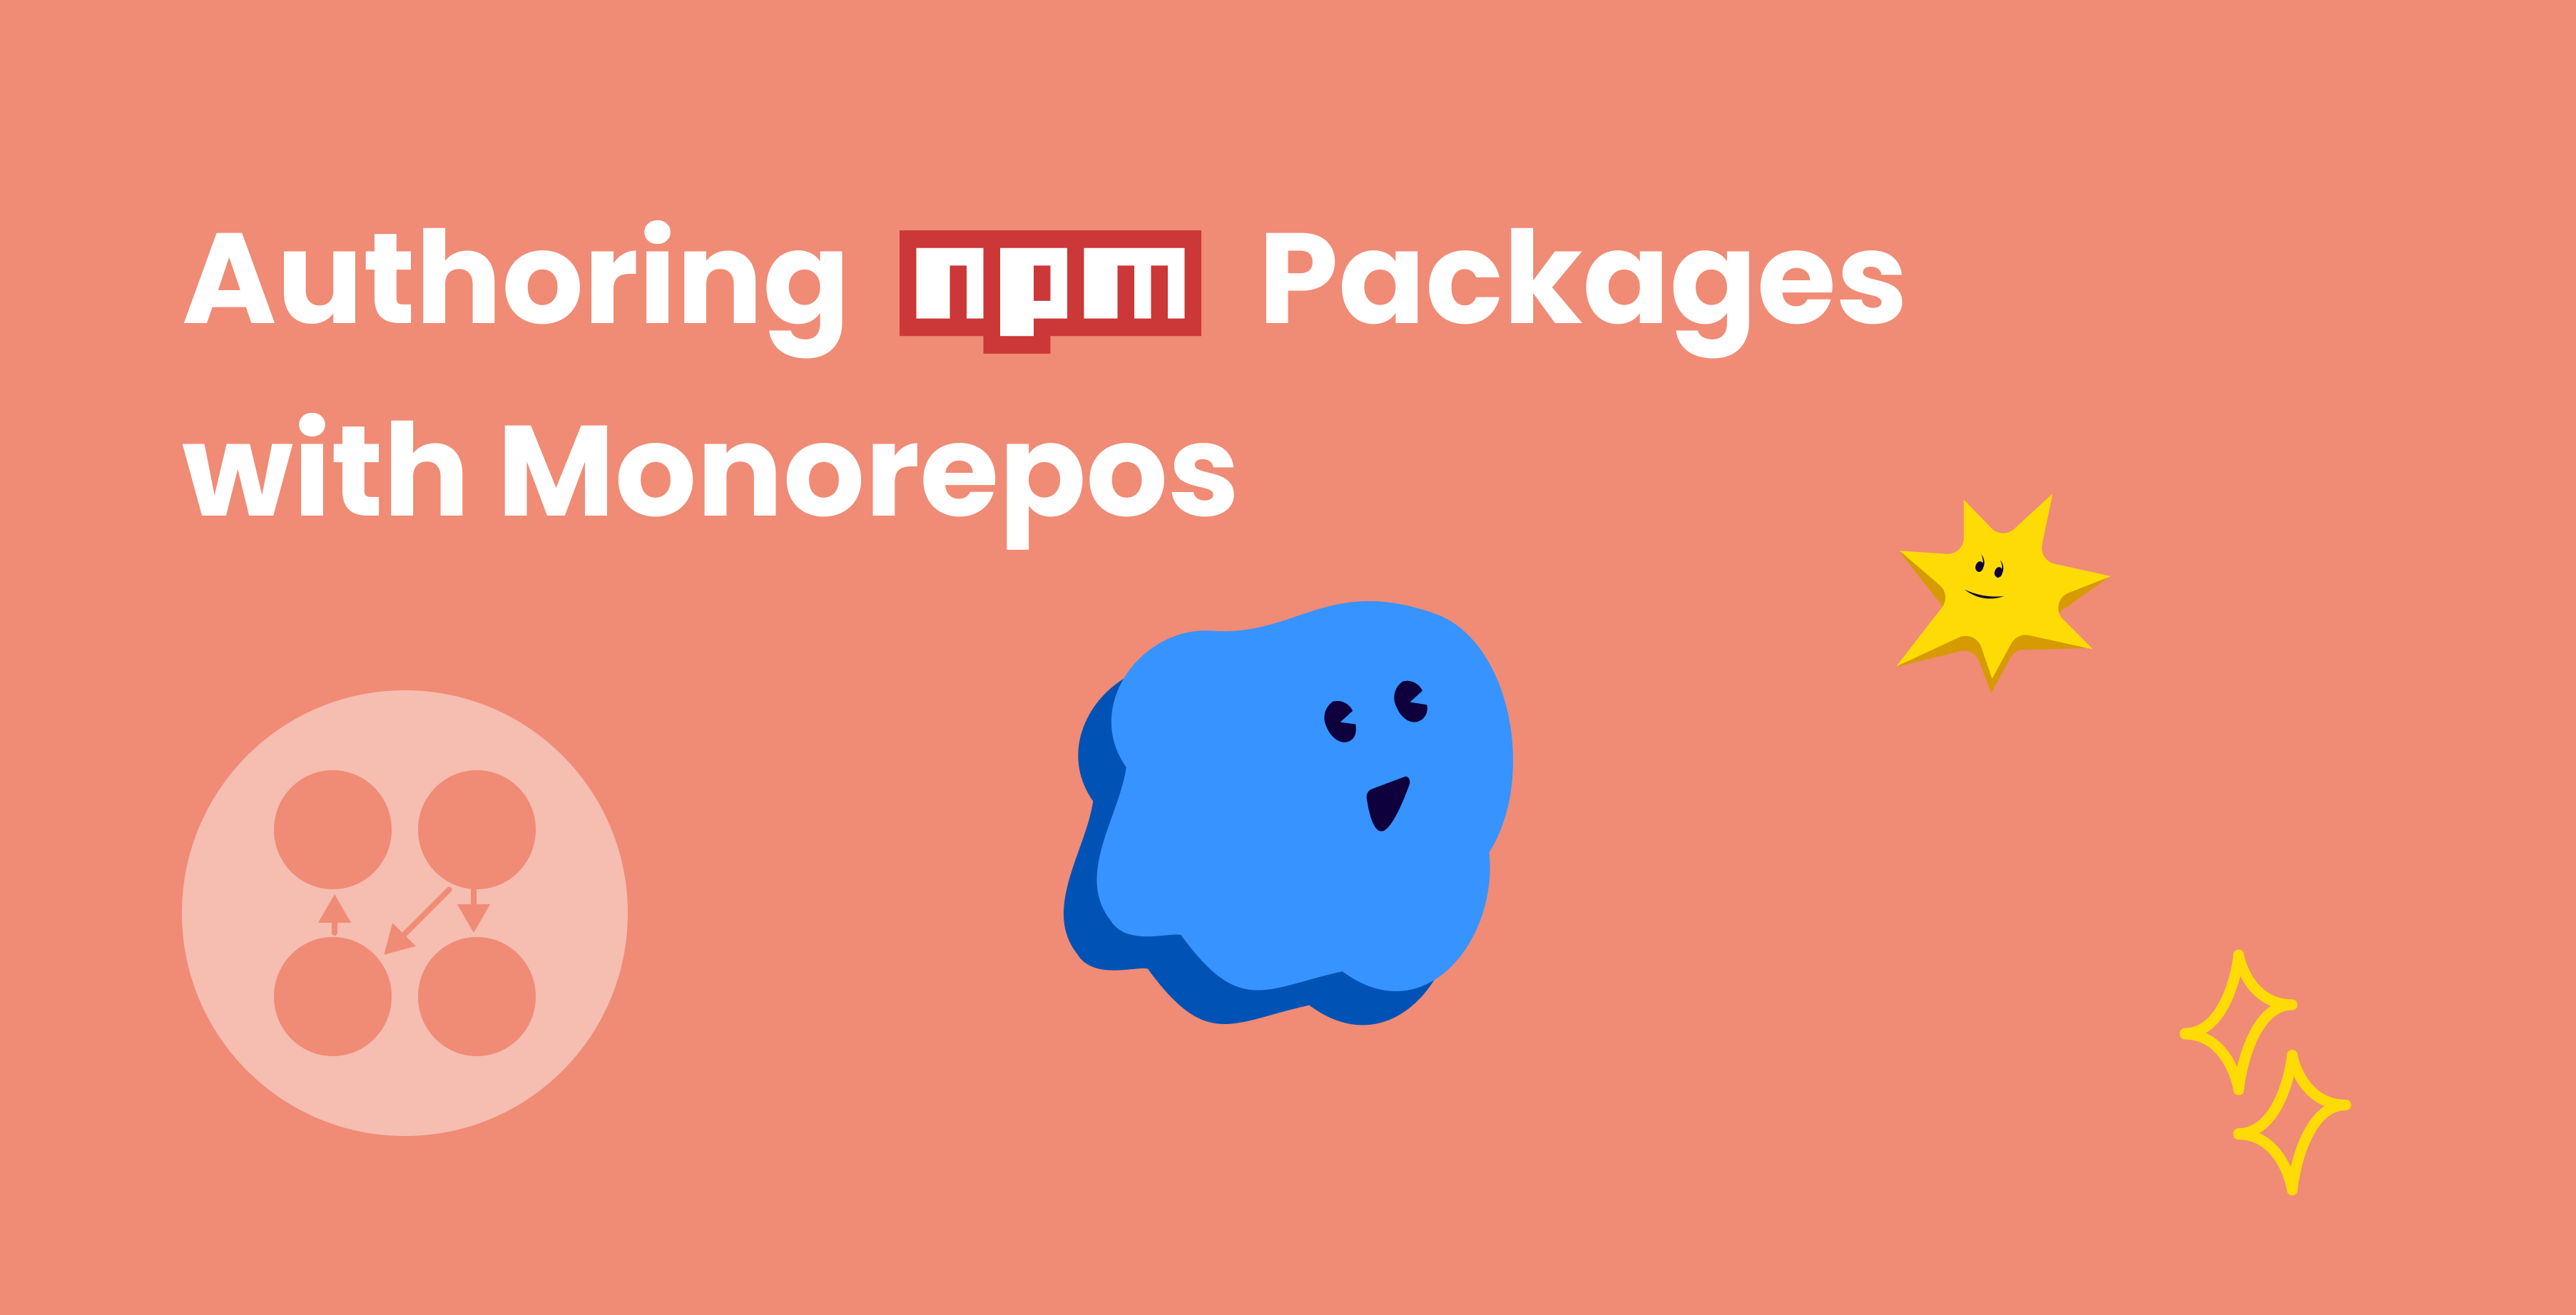 Authoring npm Packages with Monorepos